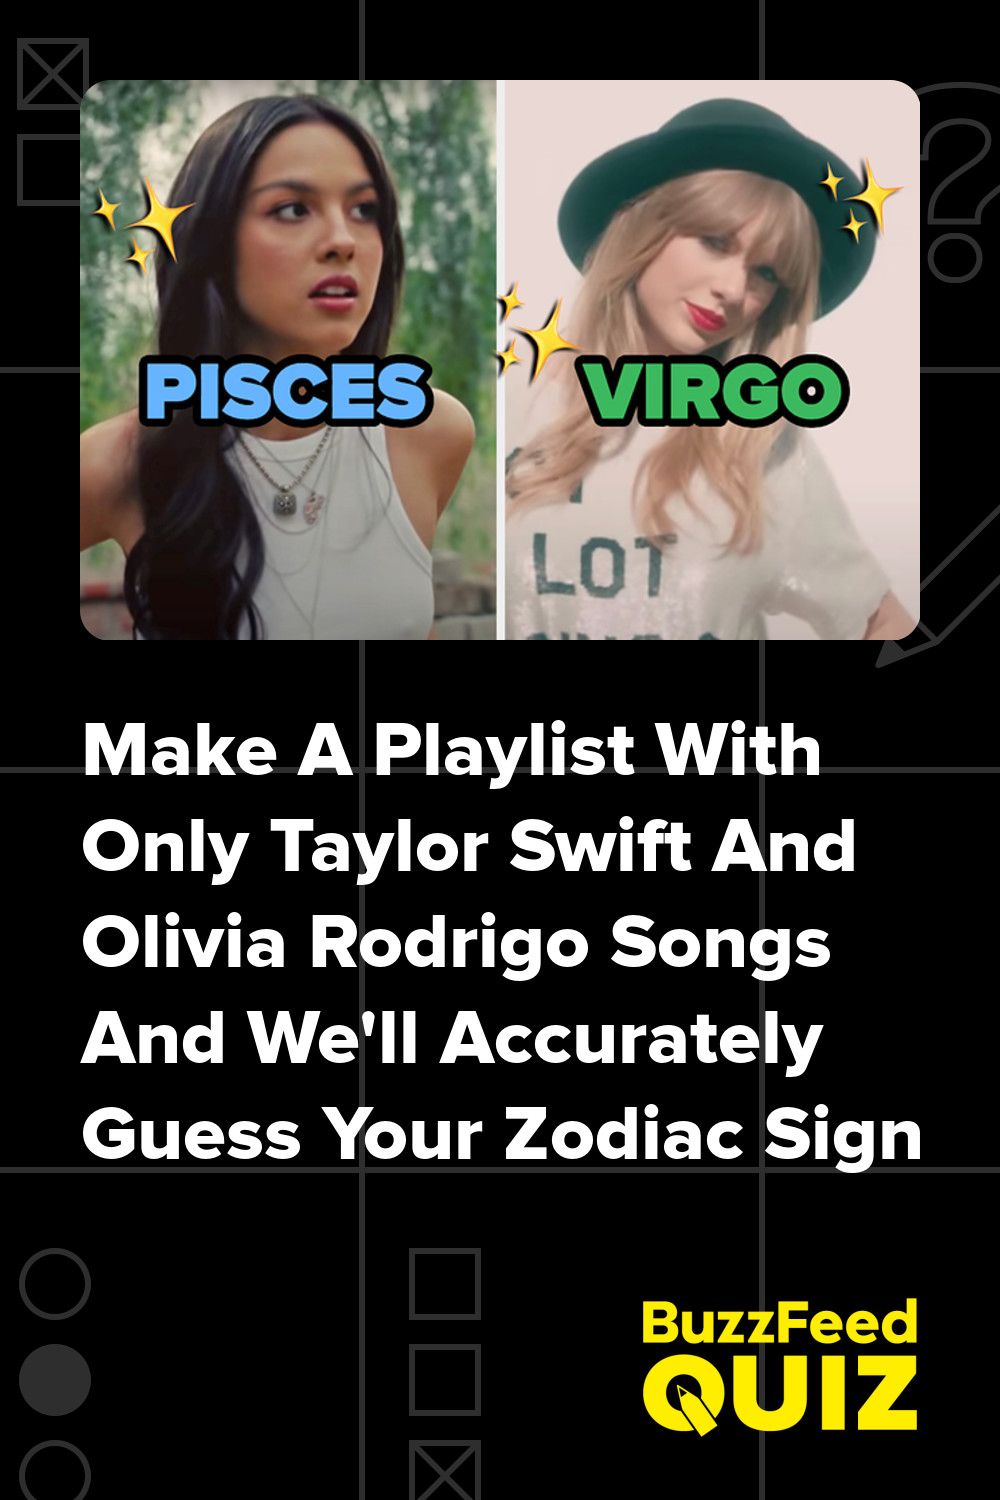 Make A Taylor Swift And Olivia Rodrigo Playlist And We'll Guess Your Zodiac Sign